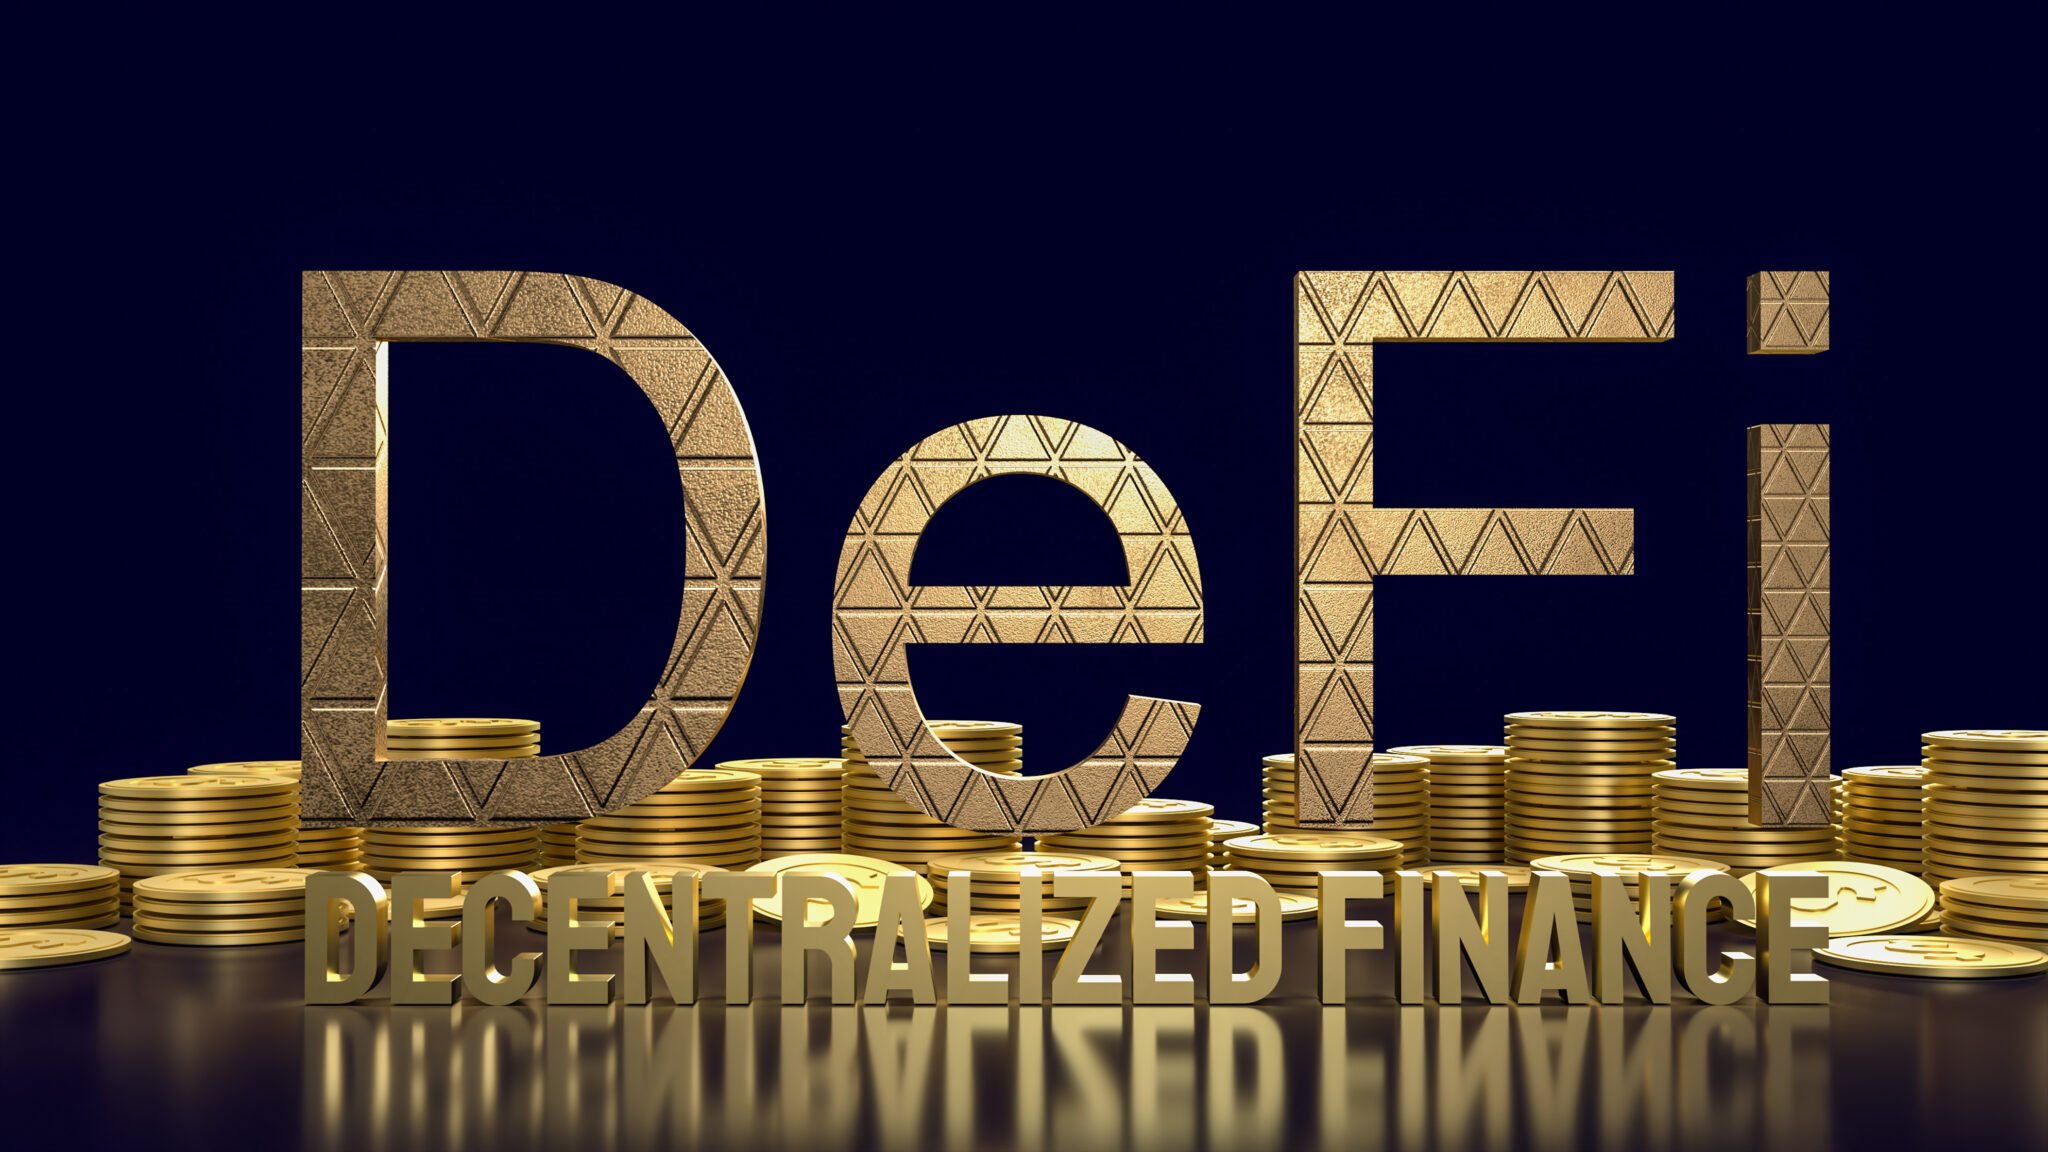 The  defi farming gold word and gold coins  for cryptocurrency business concept 3d rendering